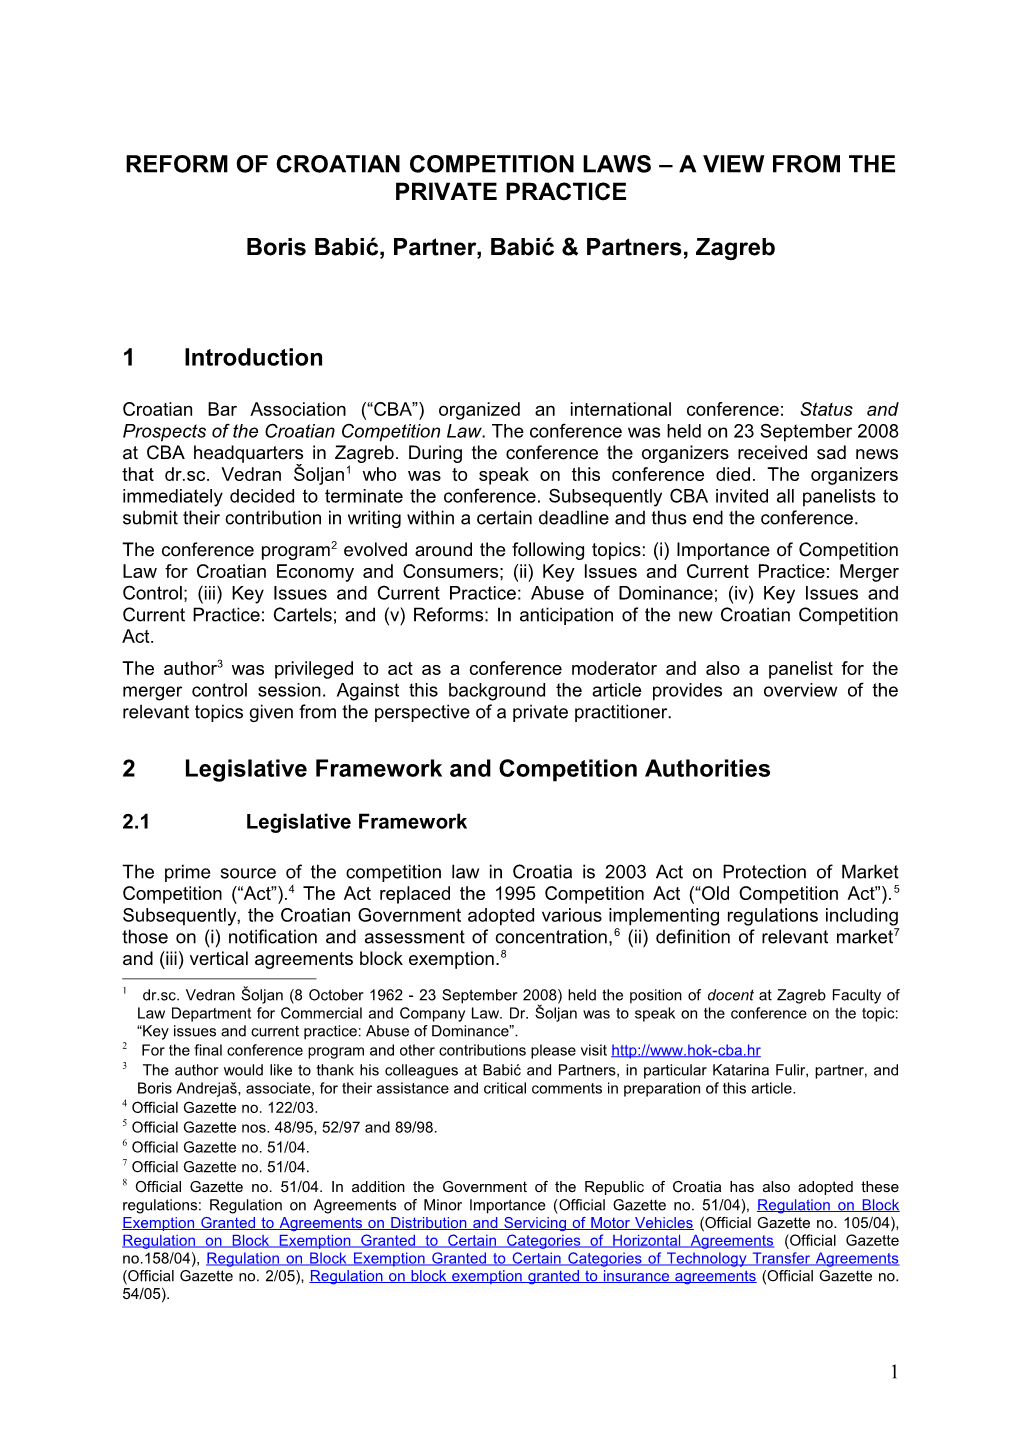 Reform of Croatian Competition Laws Article-DRAFT2 (100002-2)